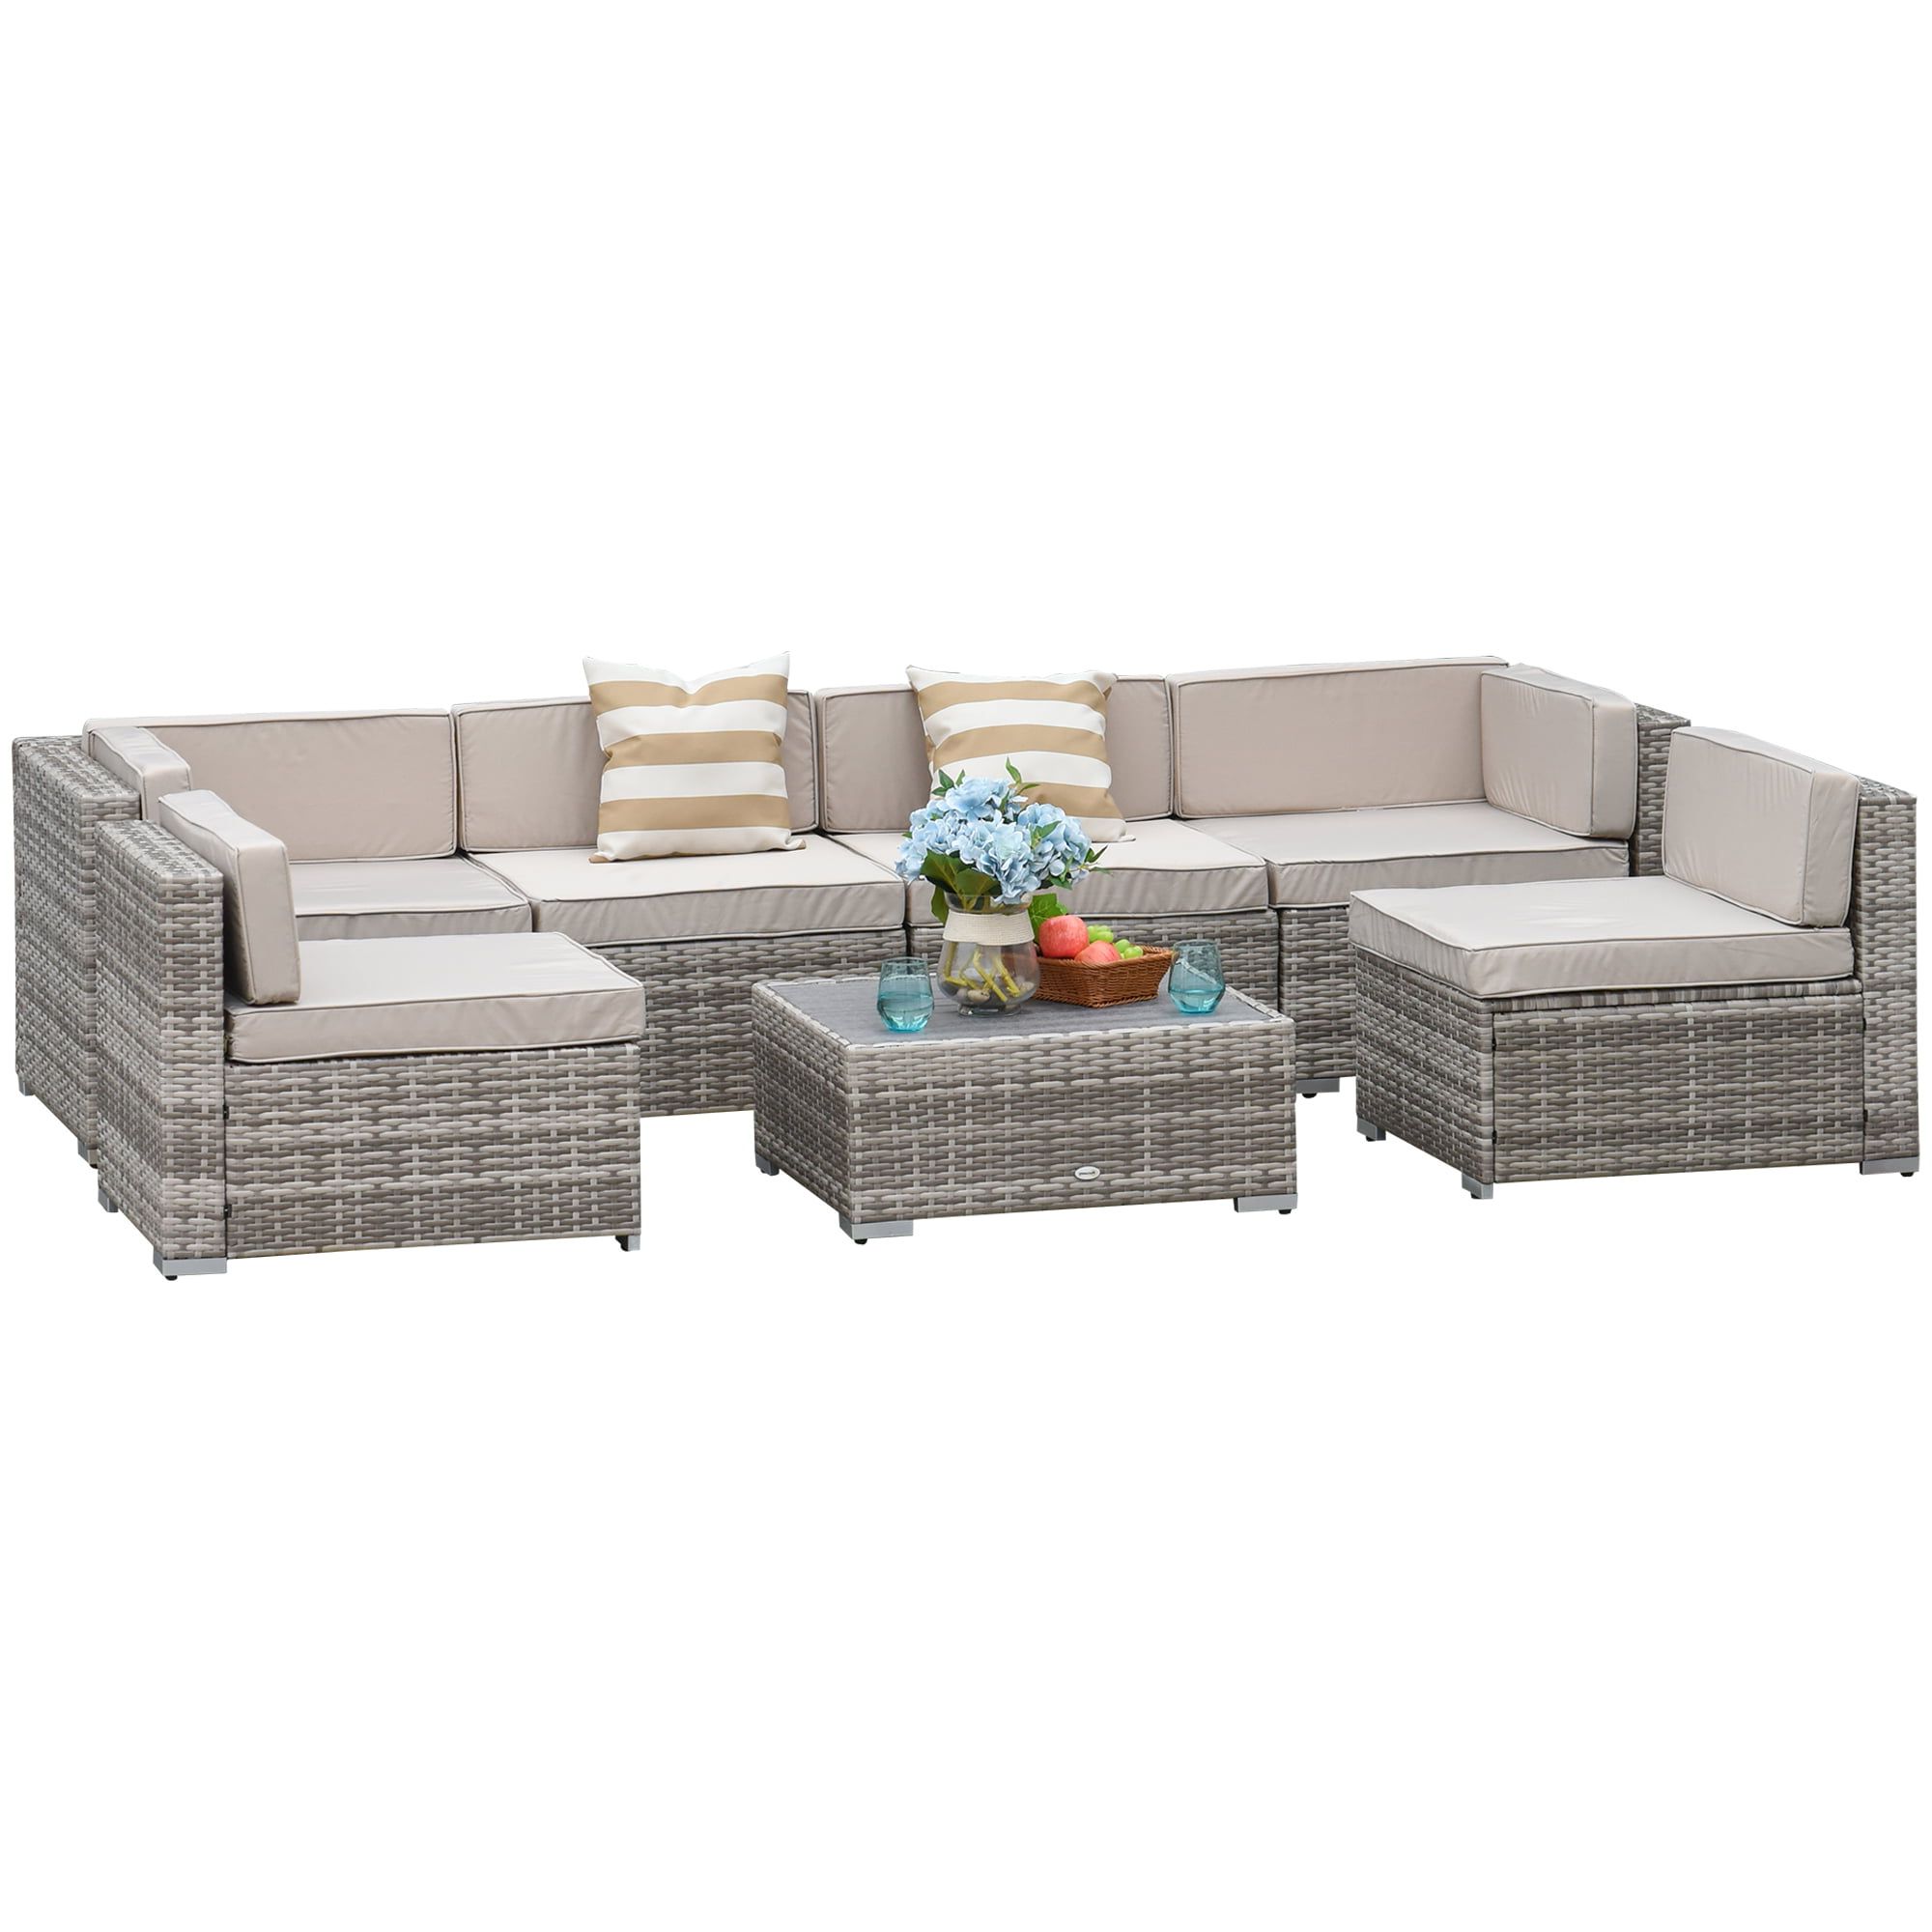 Well Liked Outdoor Couch Cushions, Throw Pillows And Slat Coffee Table In Outsunny 7 Piece Outdoor Patio Furniture Set, Pe Rattan Wicker Sectional  Sofa Patio Conversation Sets With Couch Cushions, Throw Pillows And Slat  Coffee Table, Stripe, Beige – Walmart (Photo 3 of 15)